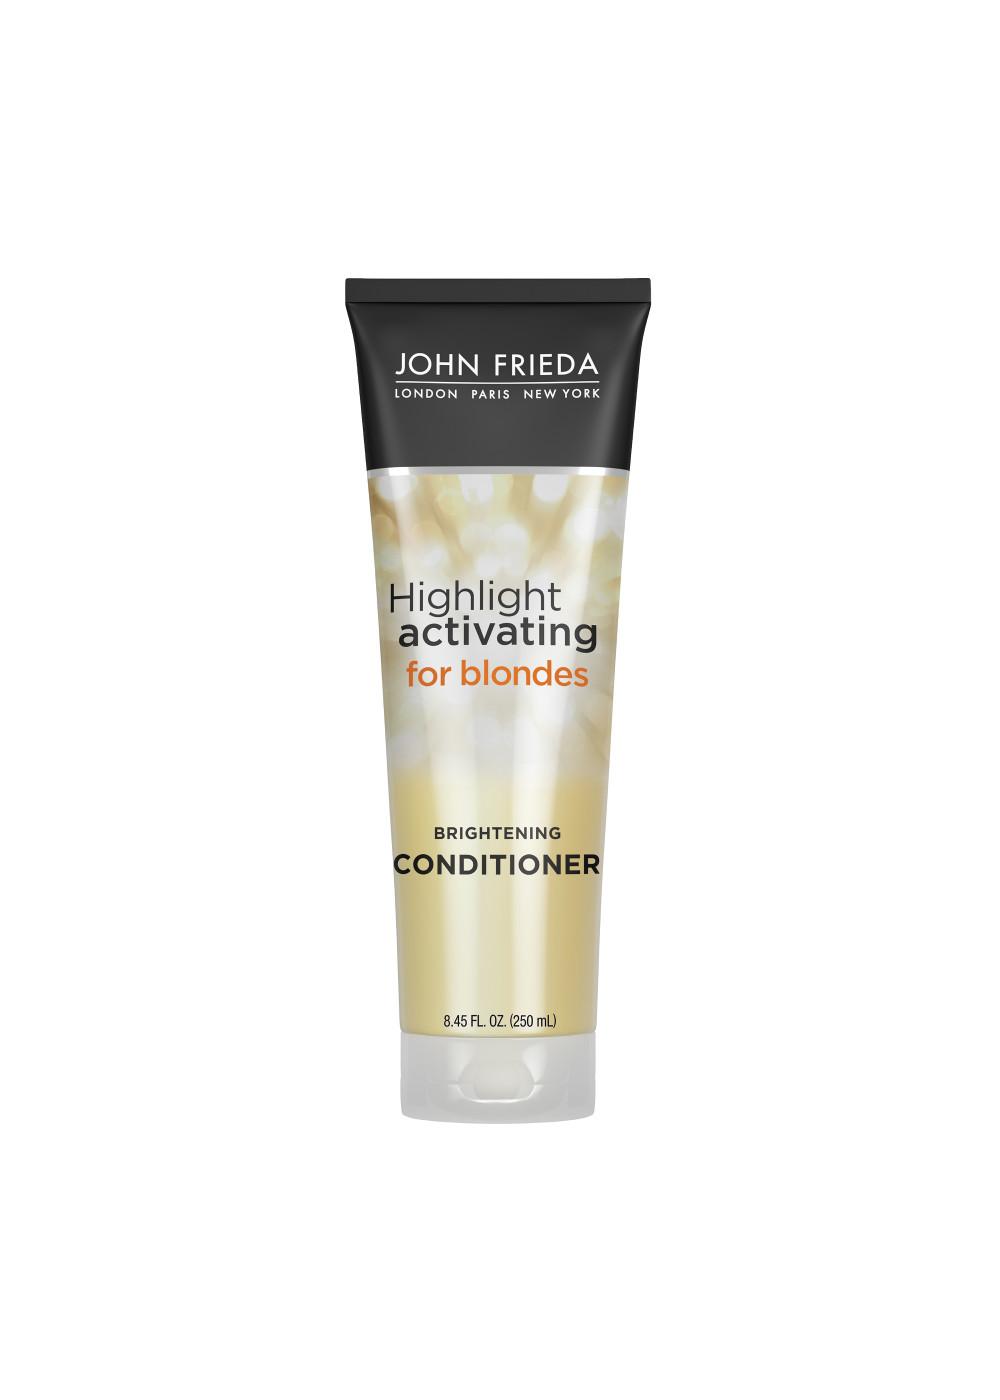 John Frieda Highlight Activating for Blondes Brightening Conditioner; image 1 of 7